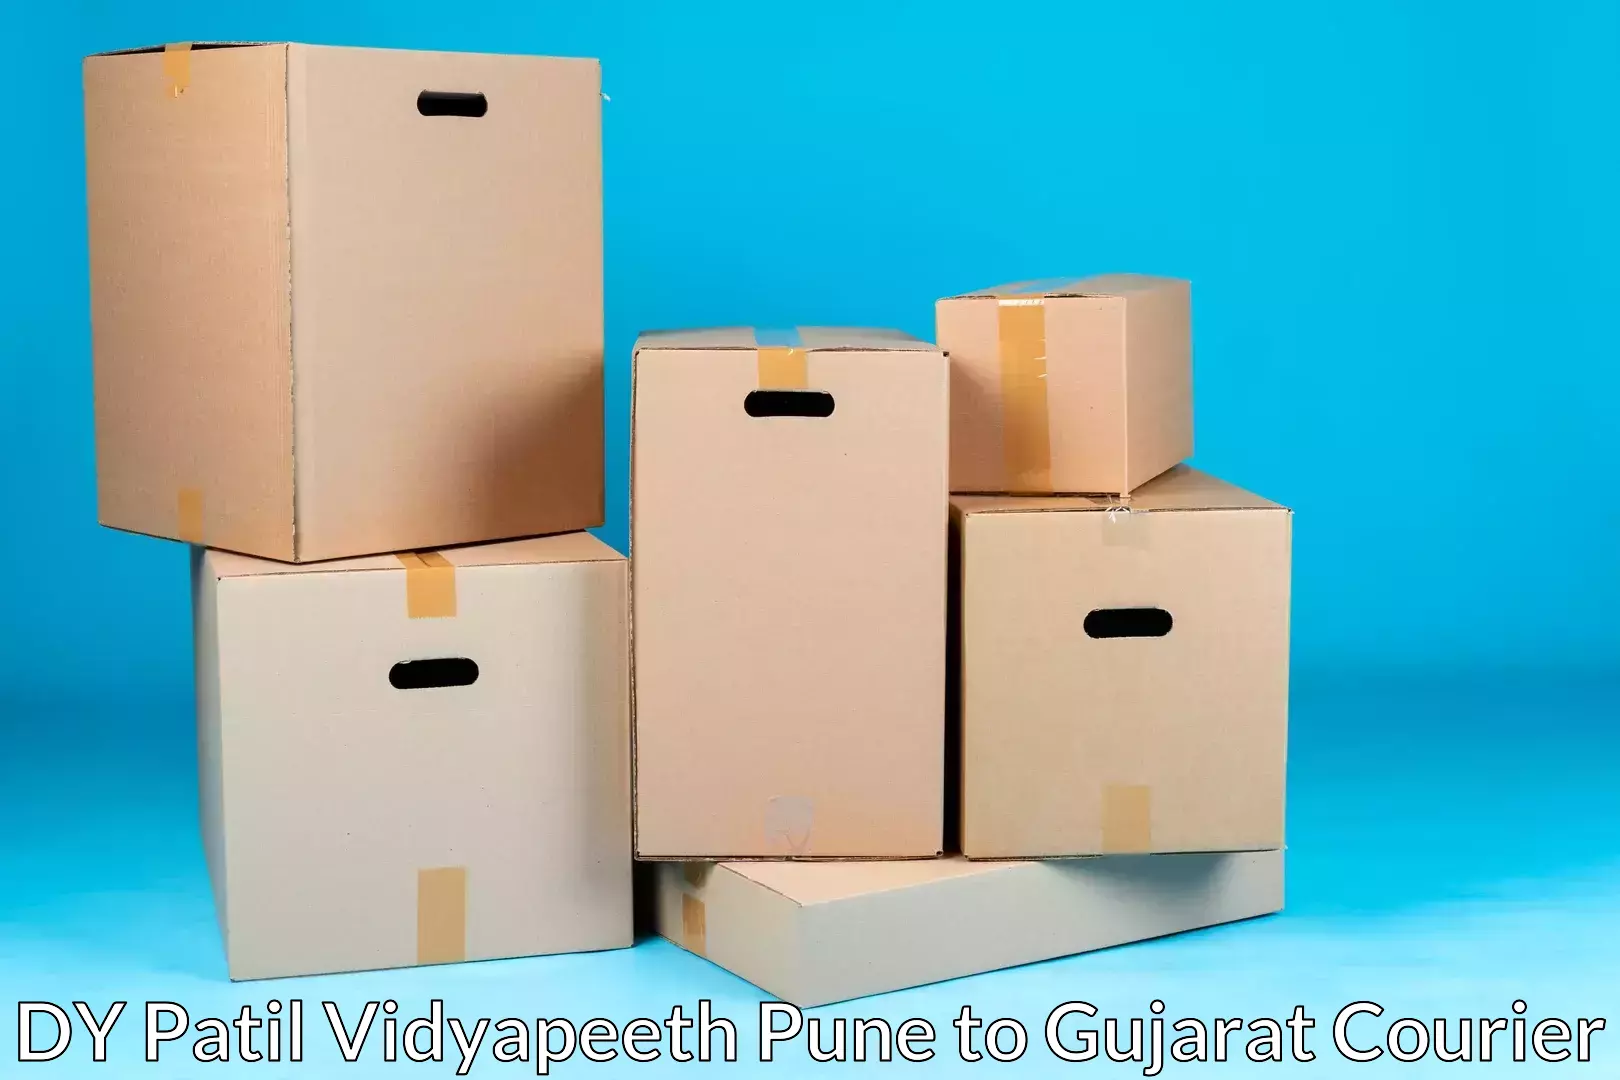 Specialized moving company DY Patil Vidyapeeth Pune to Mahemdavad